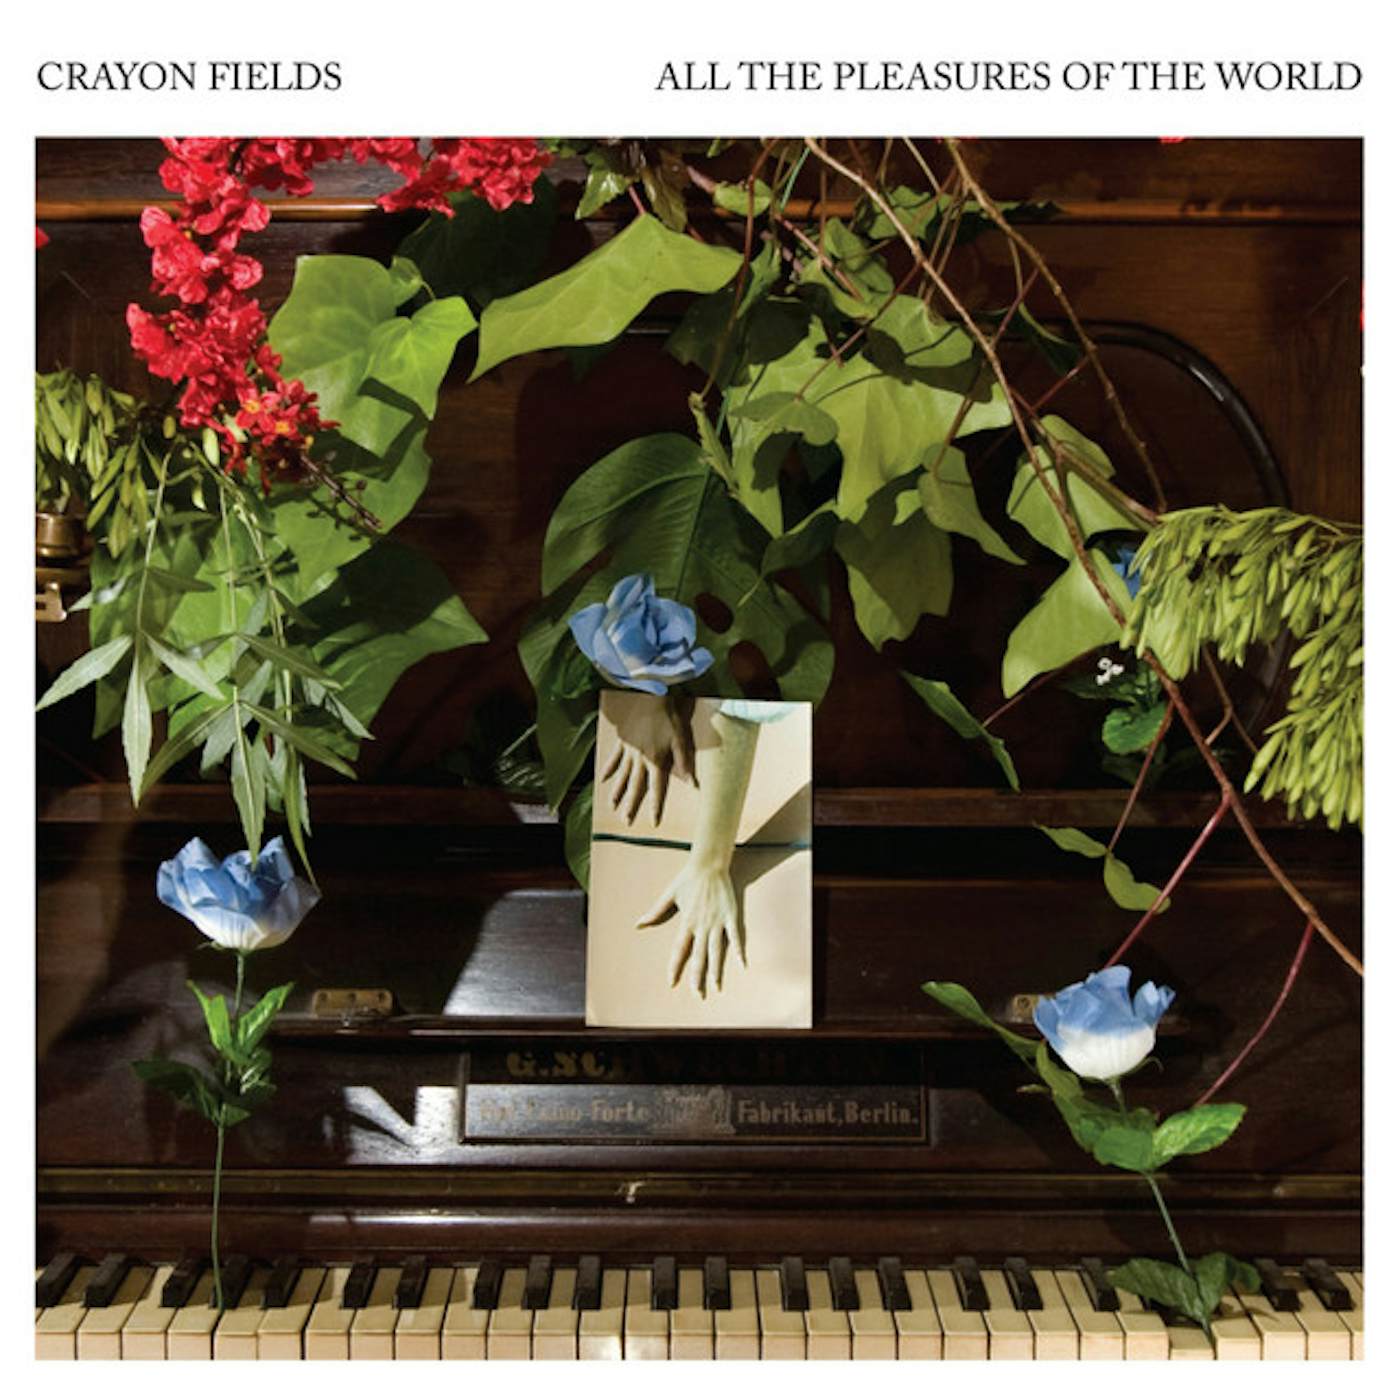 The Crayon Fields ALL THE PLEASURES OF THE WORLD CD